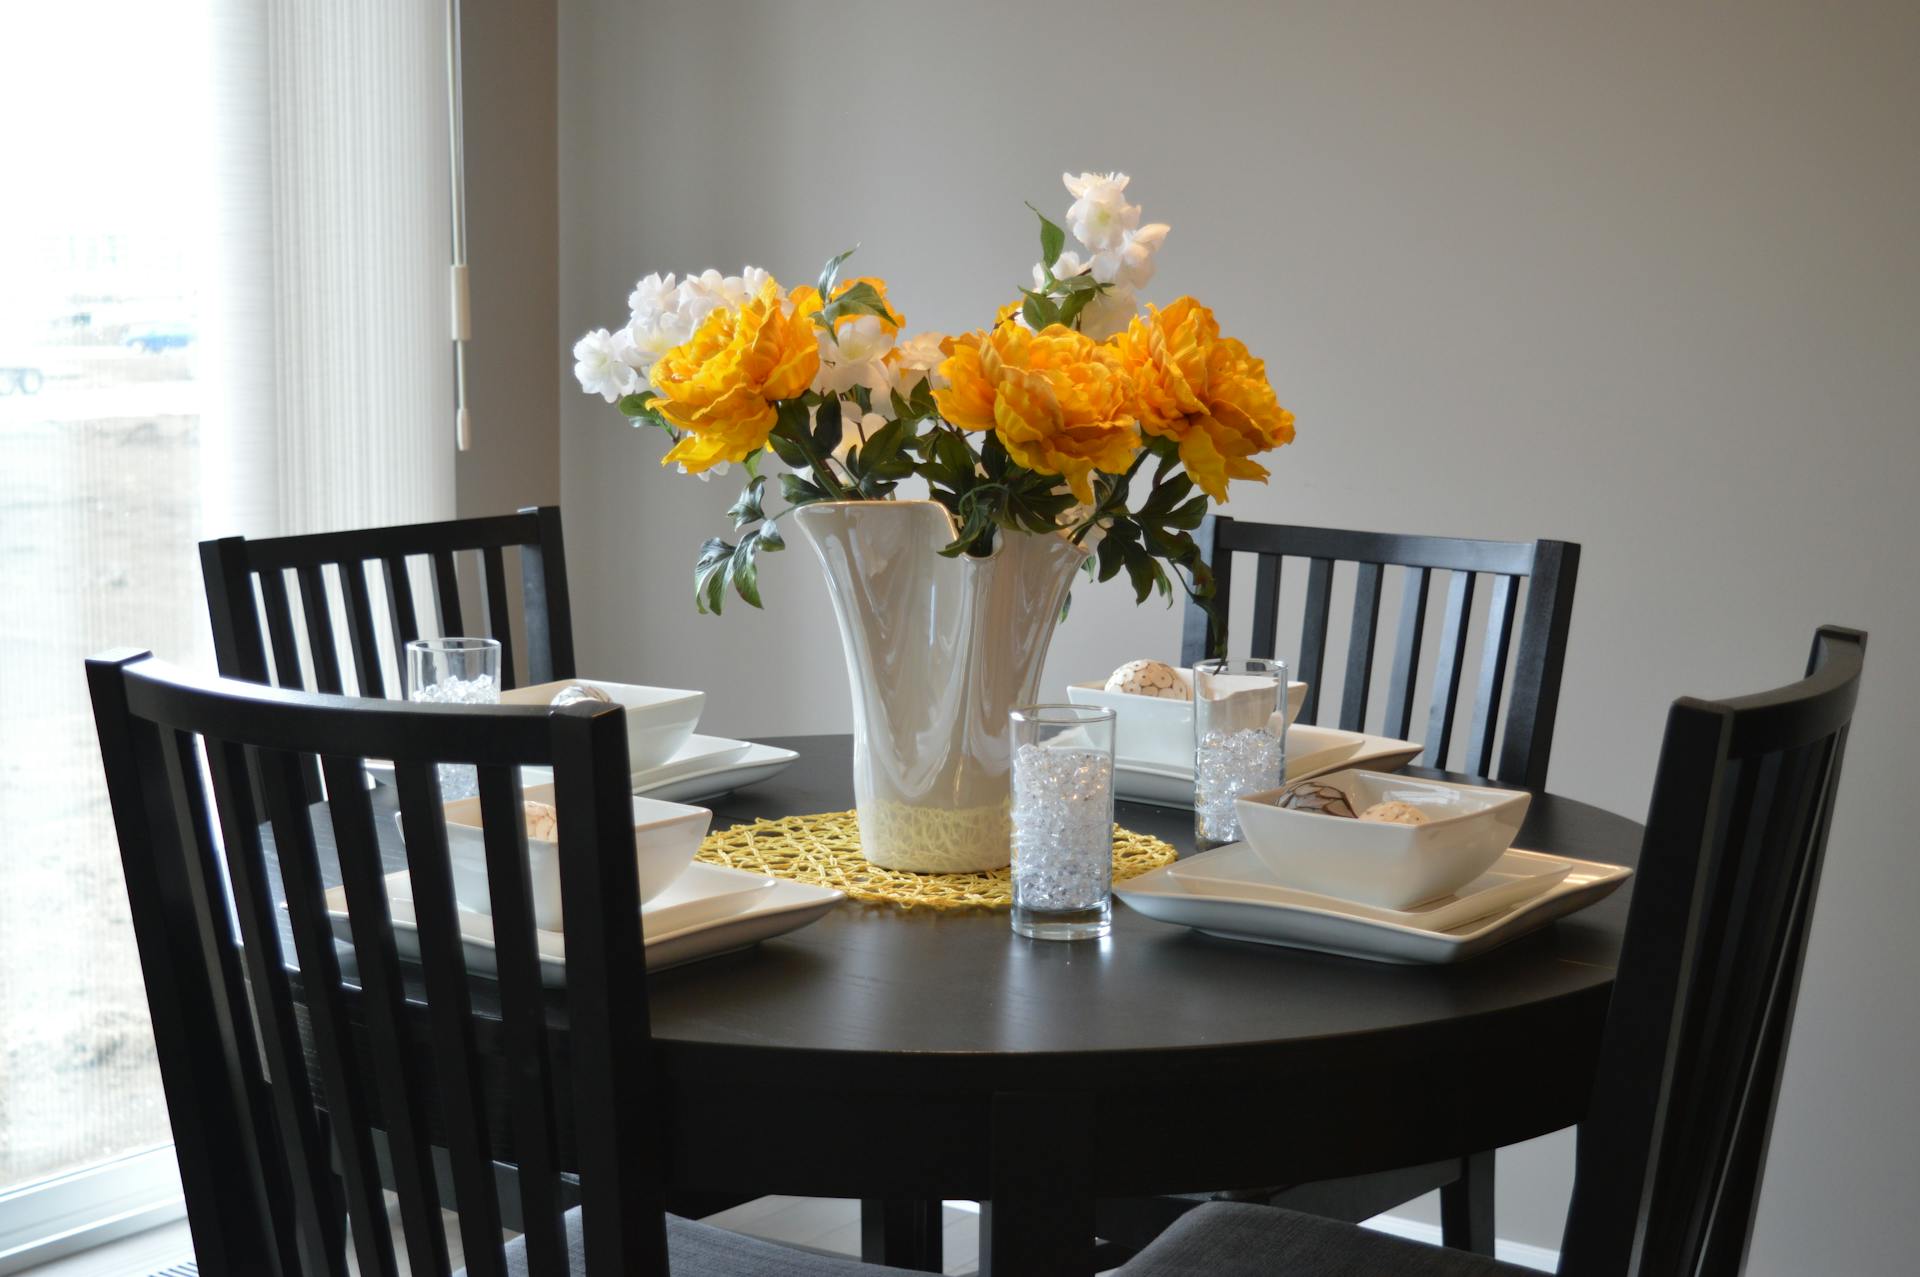 A white ceramic vase on a dining table | Source: Pexels